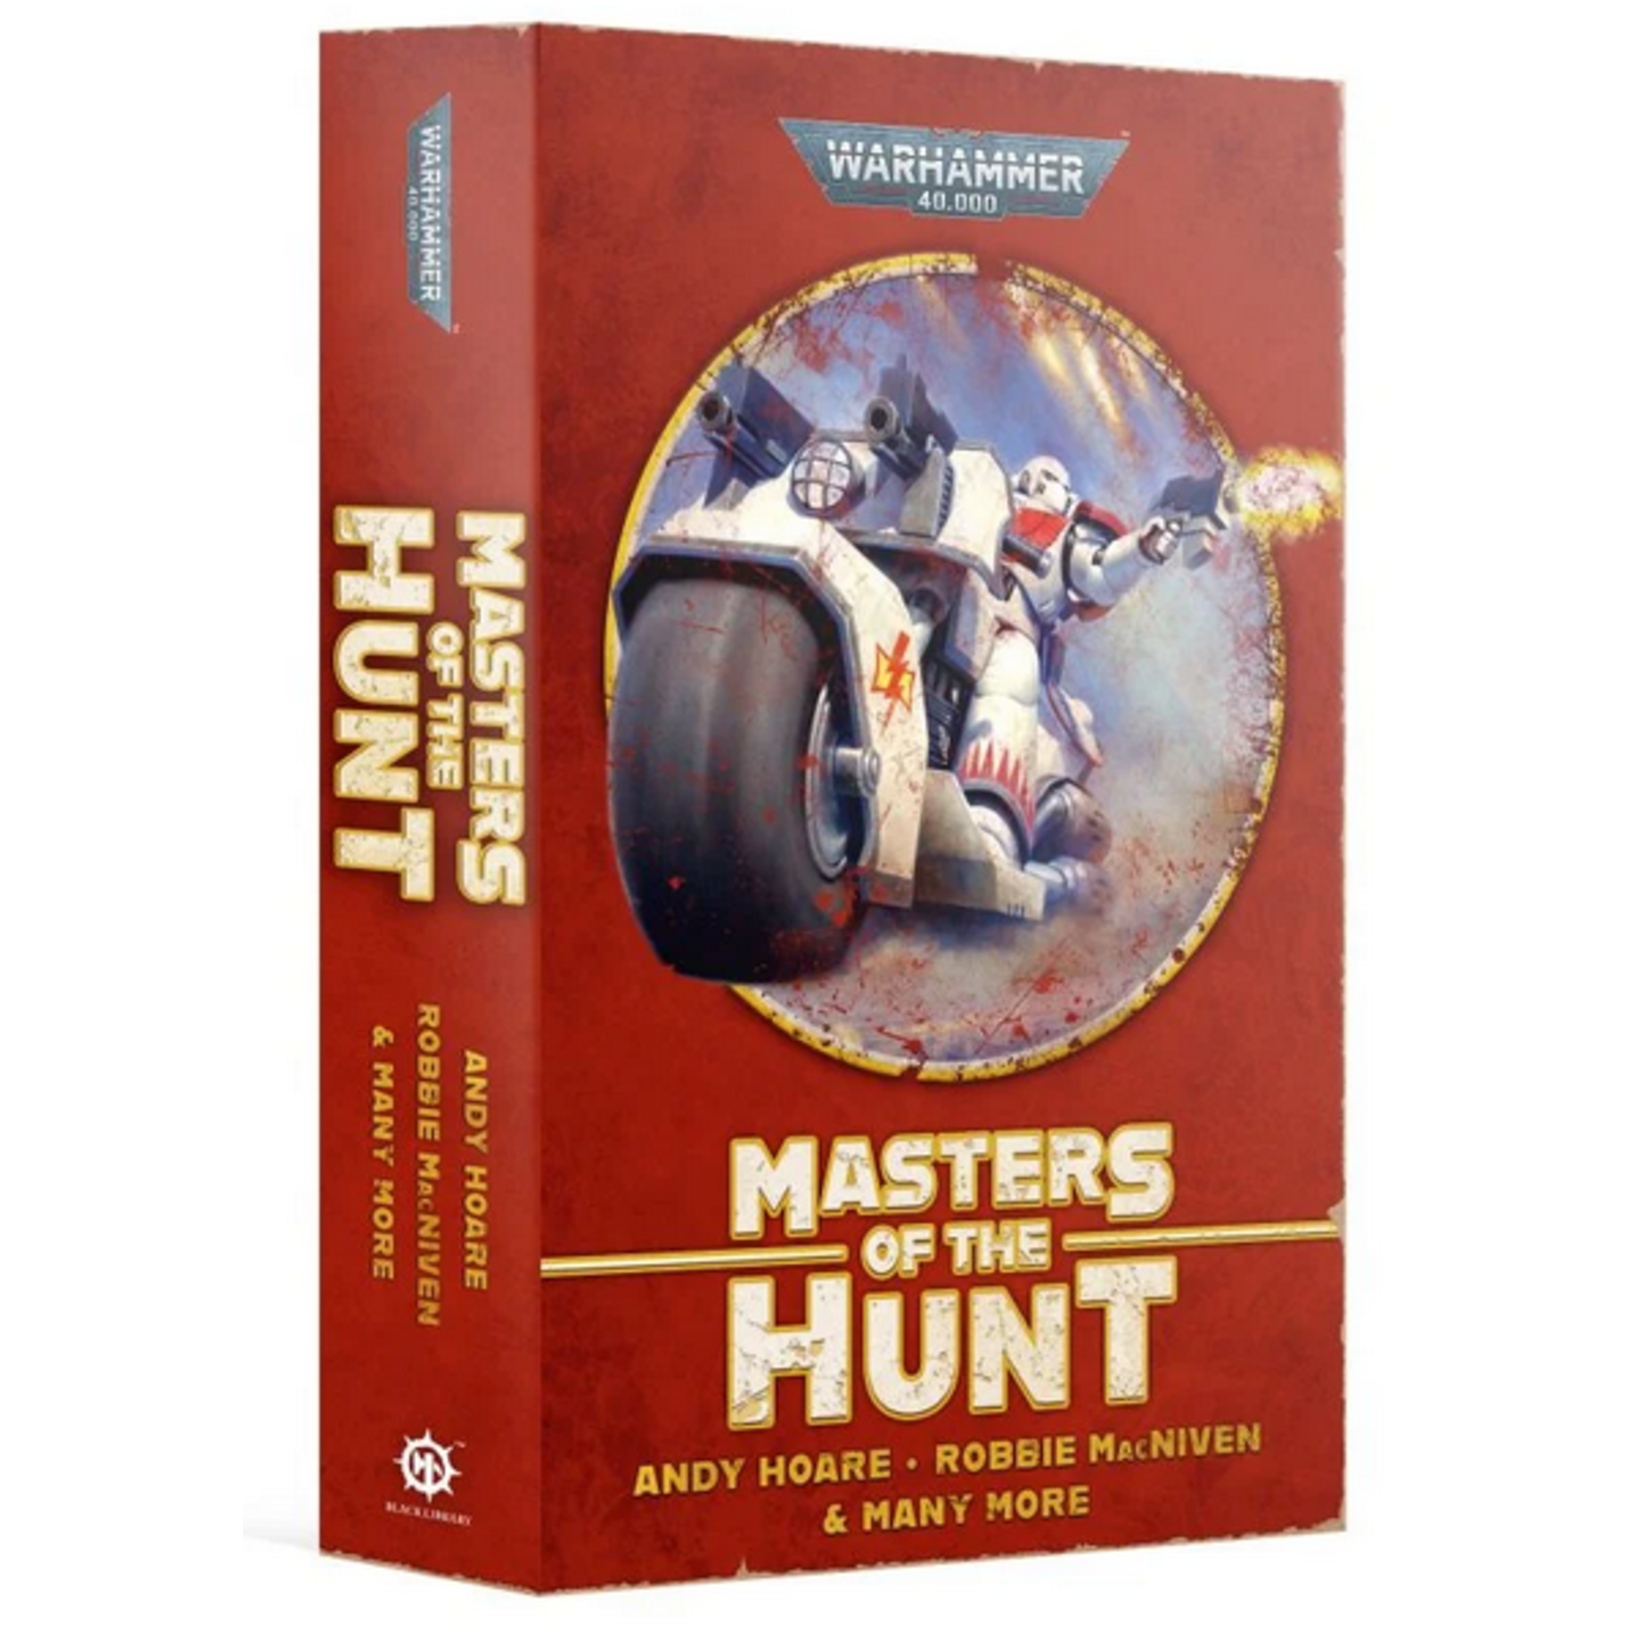 BL: Masters of the Hunt